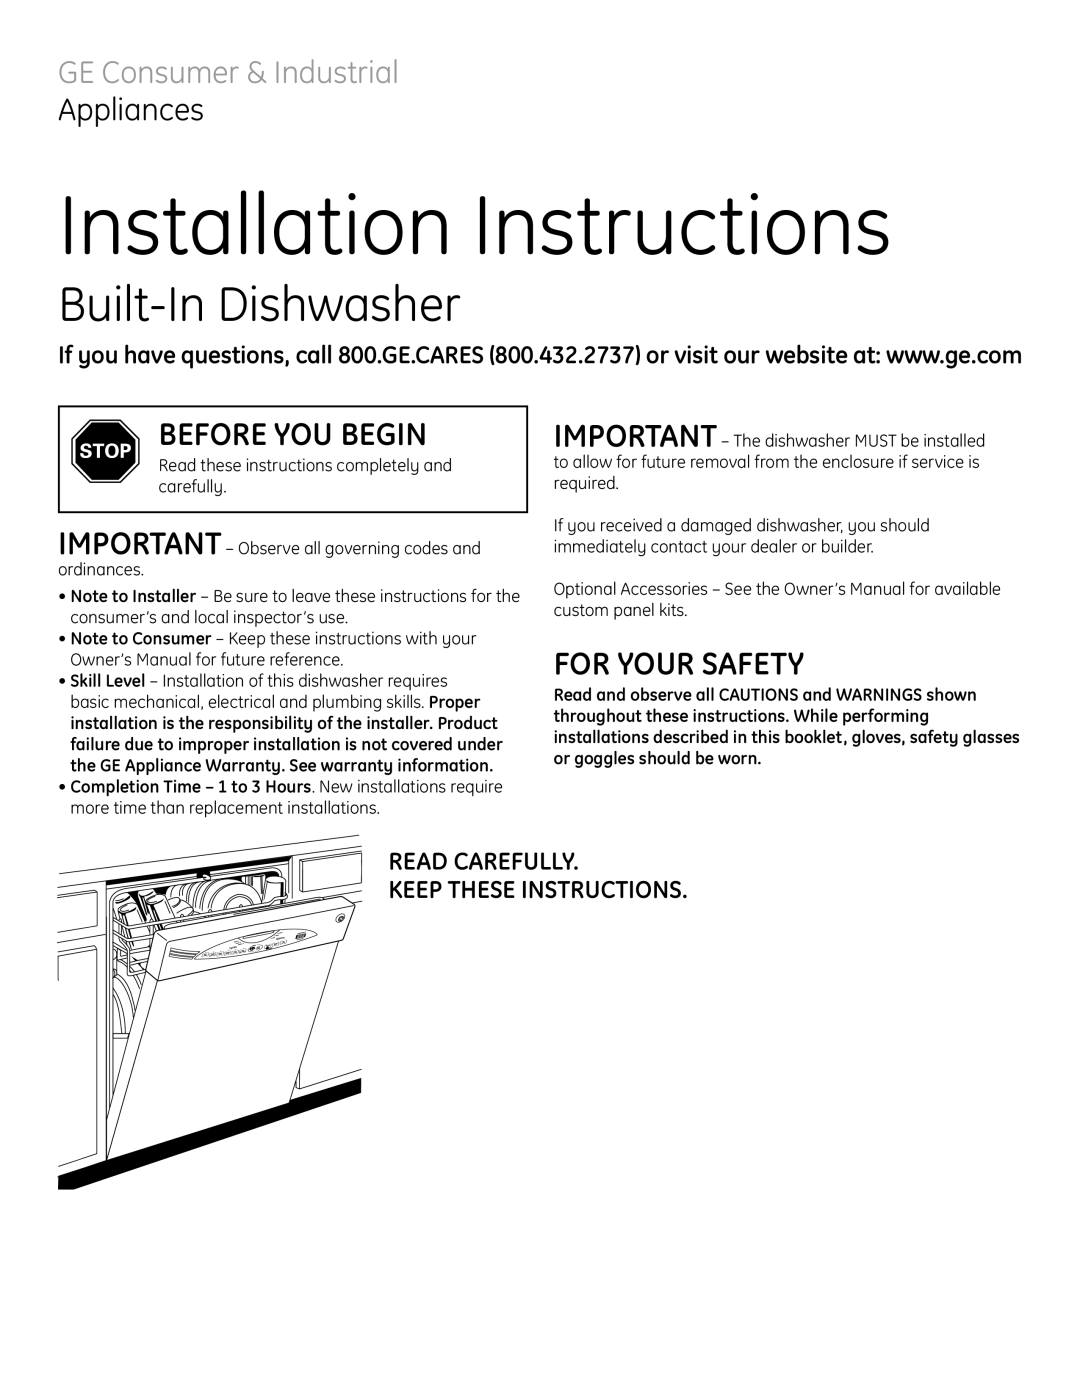 GE GLD6500LWW/CC/BB installation instructions Before You Begin, For Your Safety, Read Carefully Keep These Instructions 